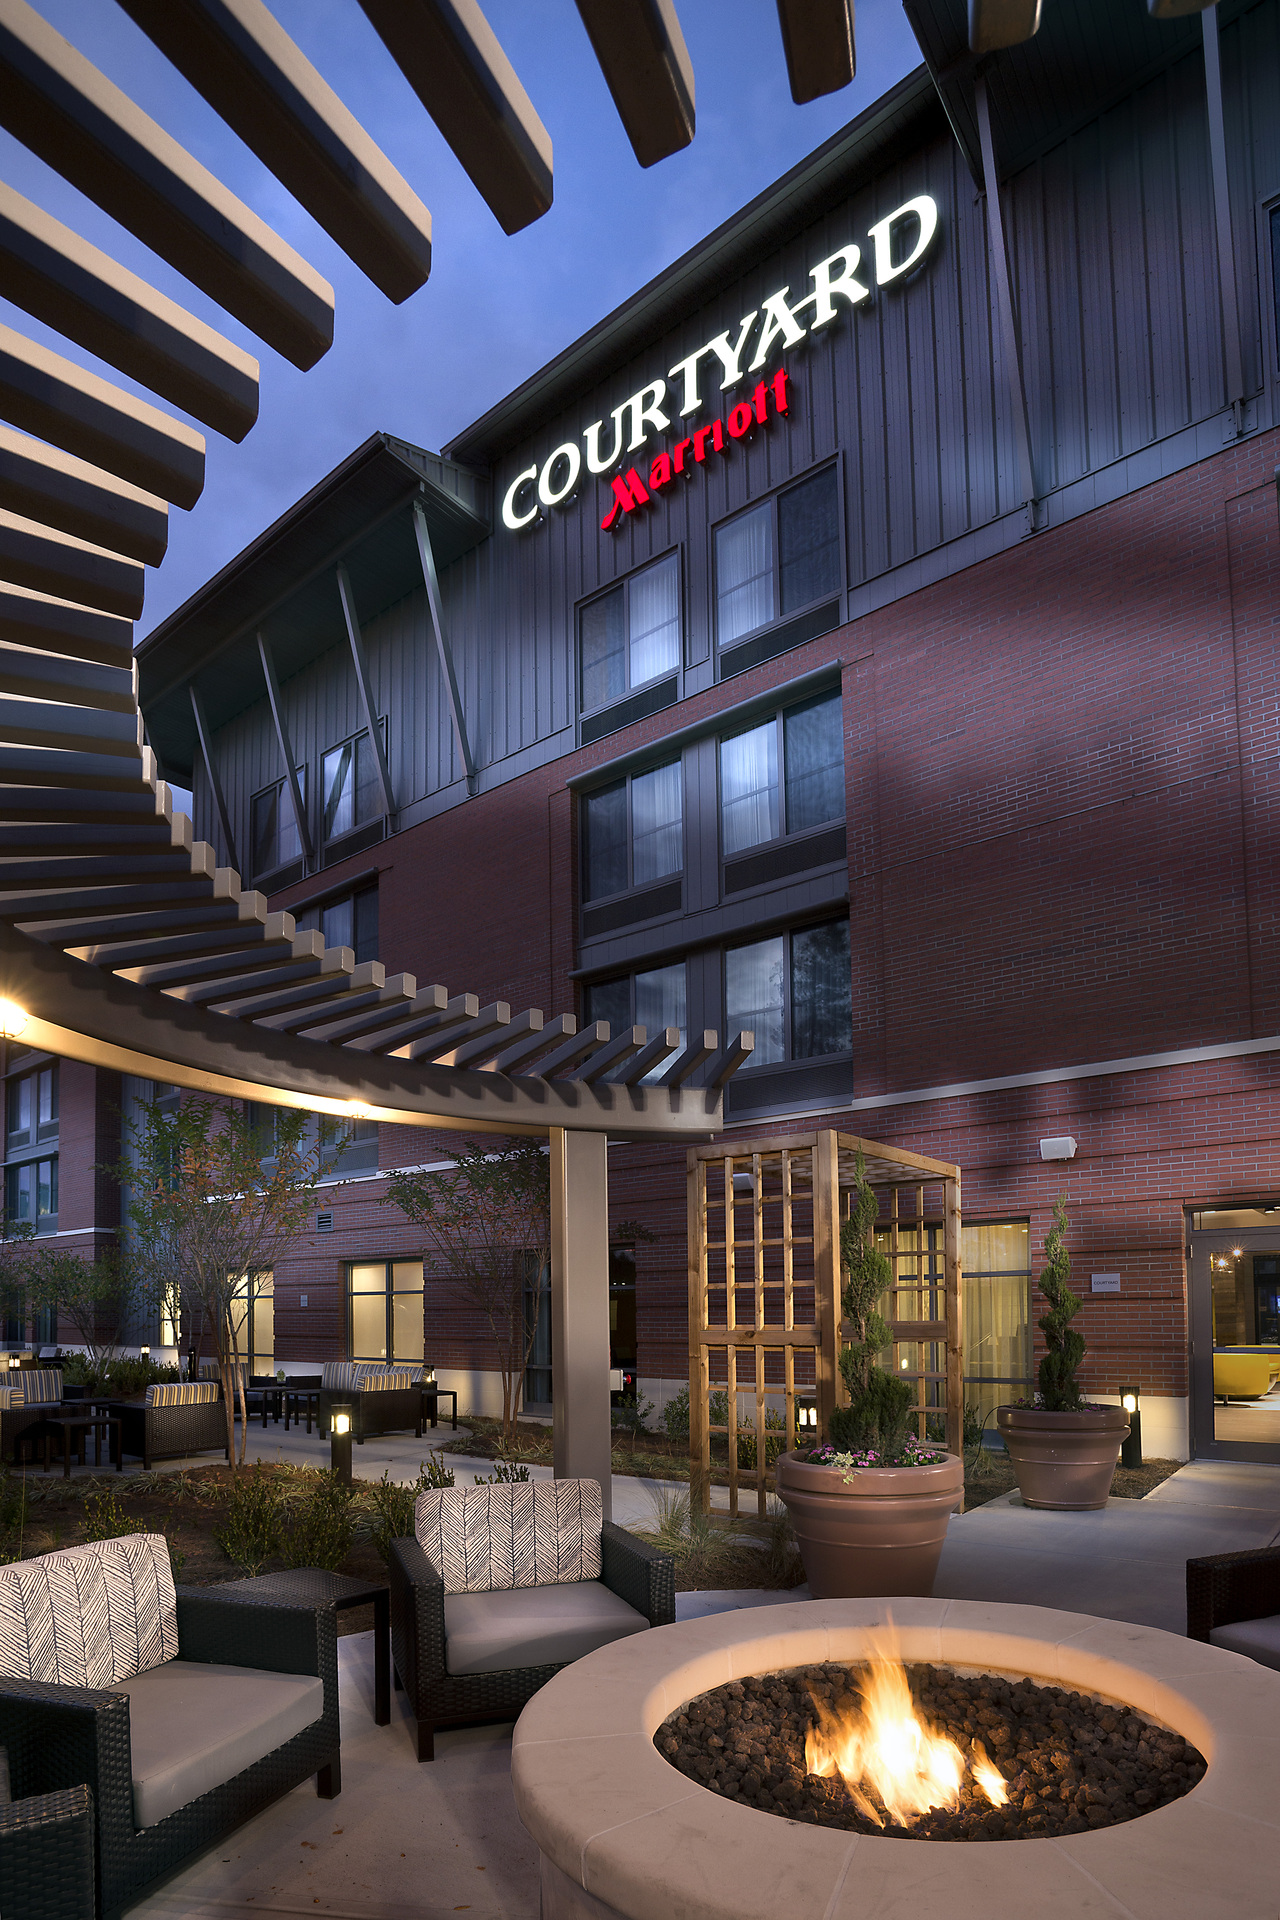 courtyard by marriott summerville project by j banks design group on the firm's awards page